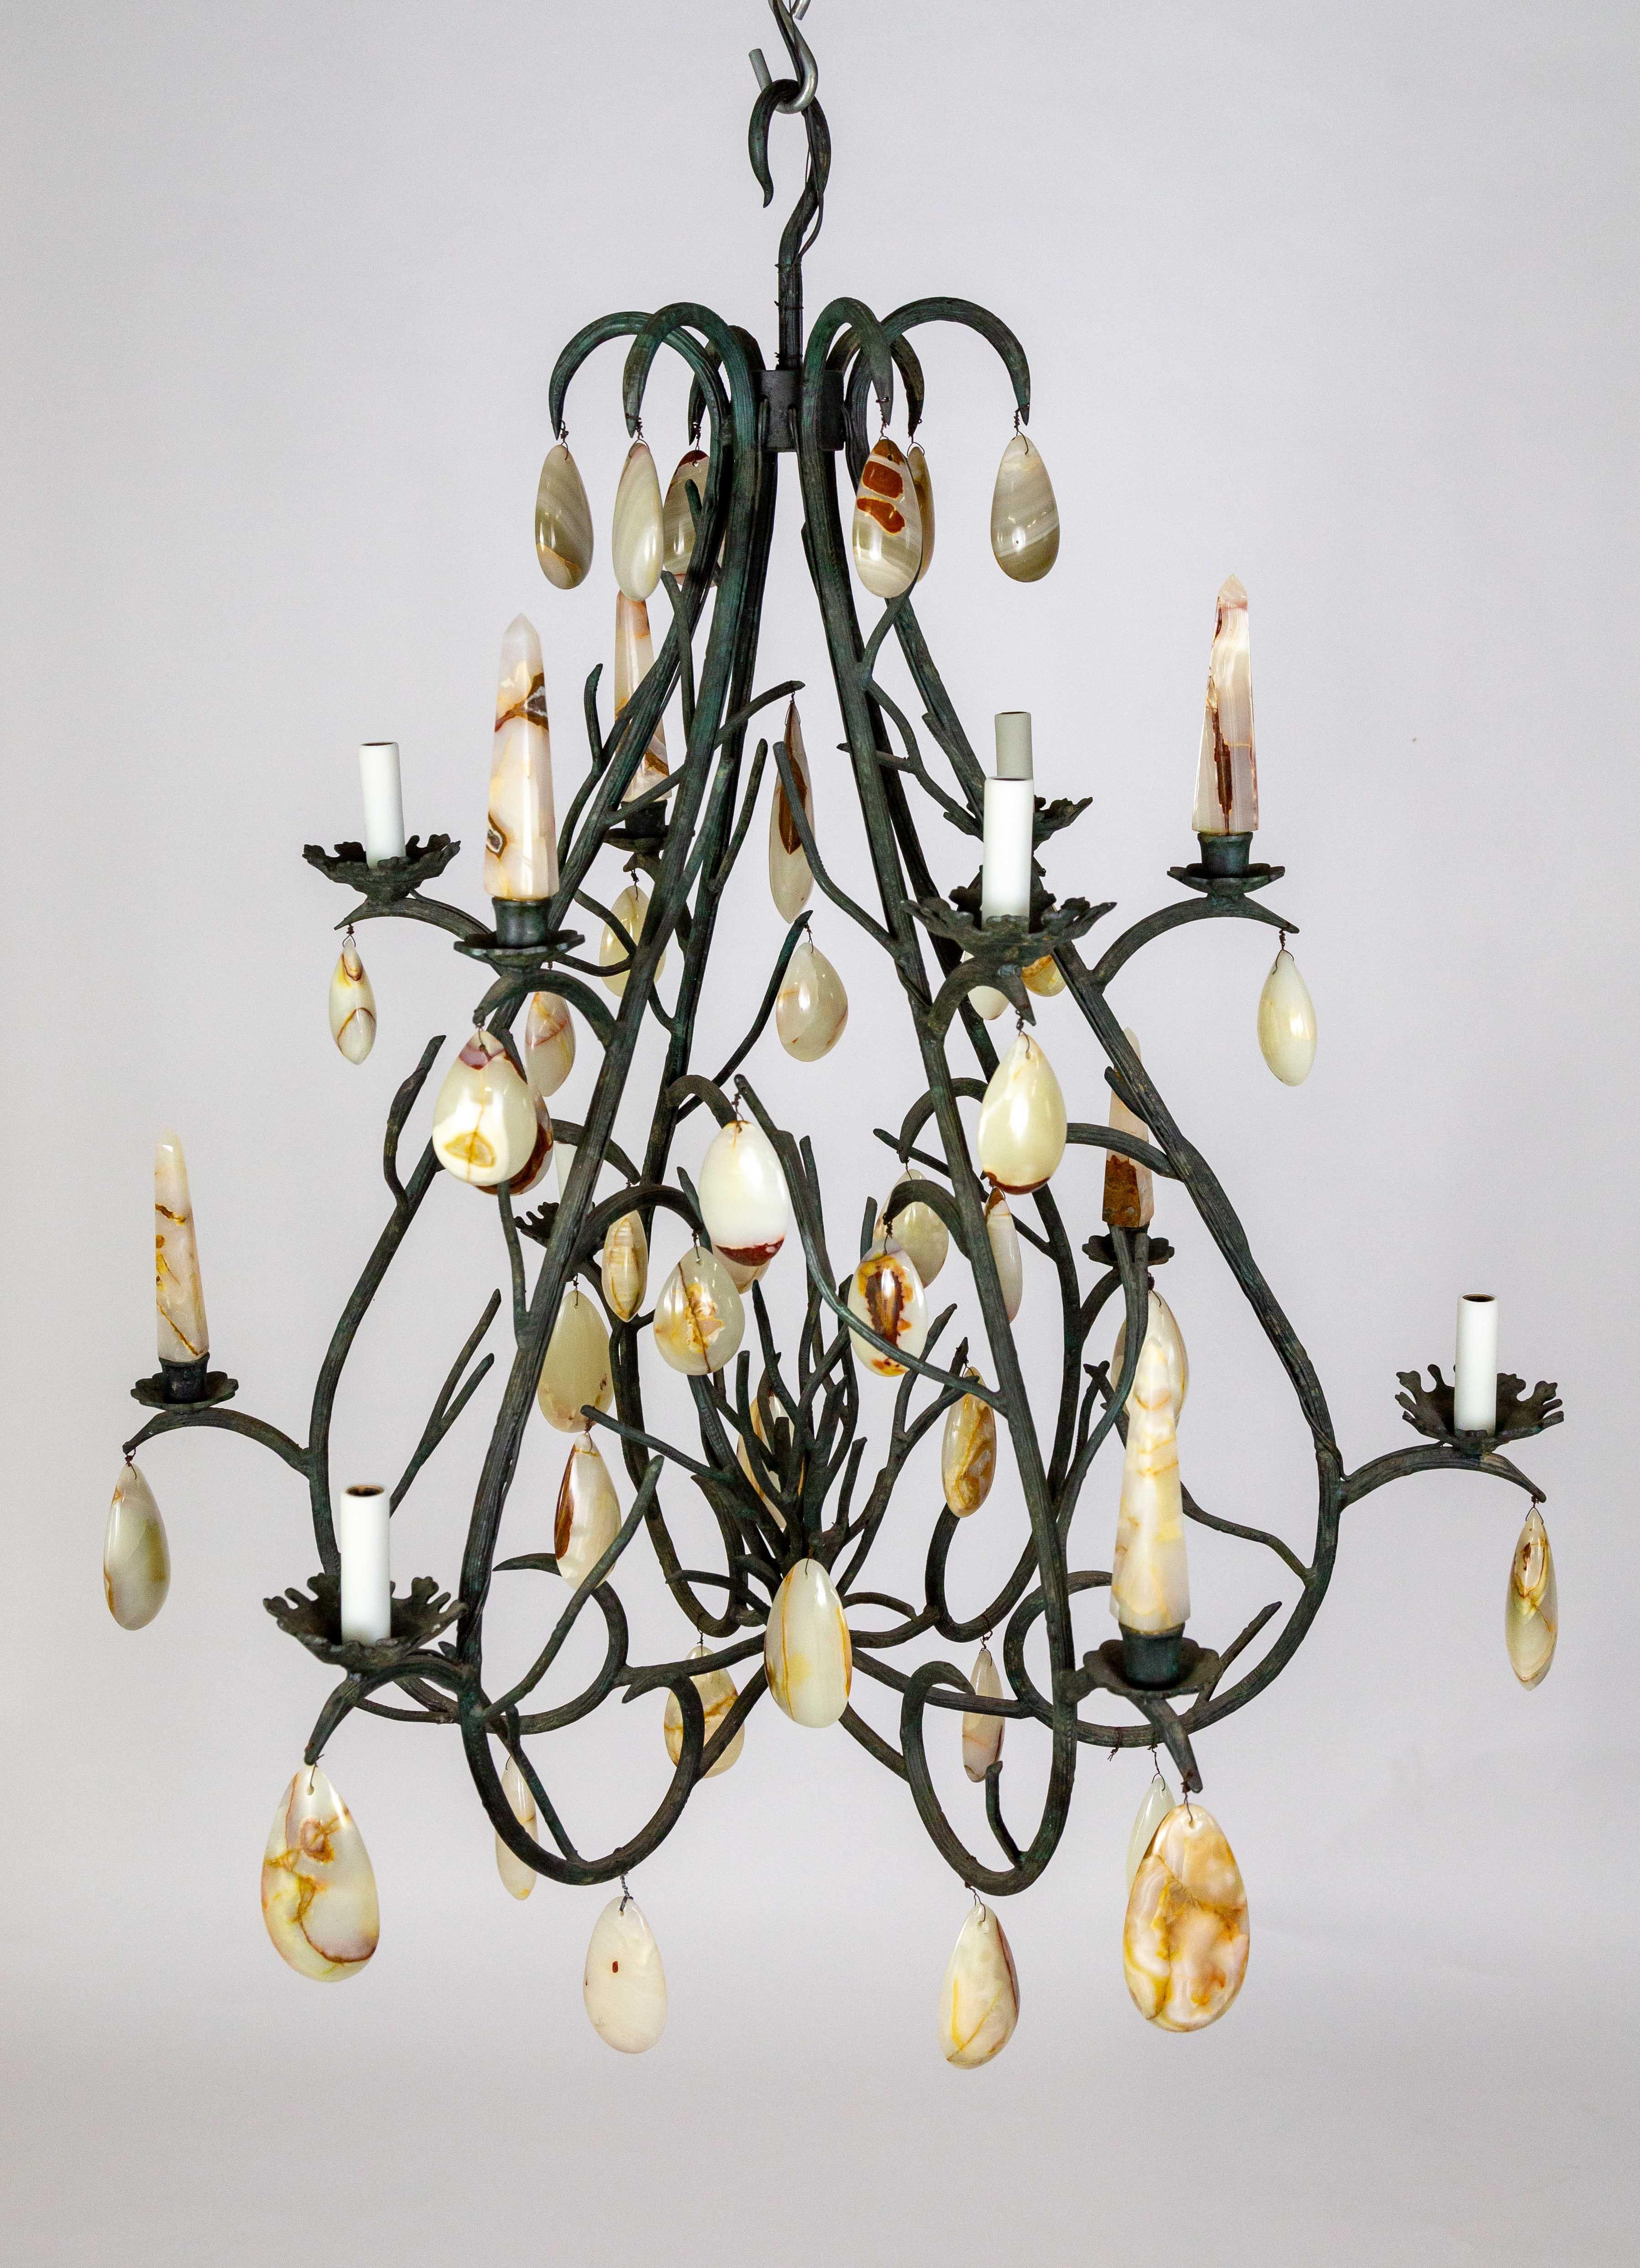 Giant Forest Green Branch Chandelier w/ Onyx Crystals by Luciano Tempo For Sale 6